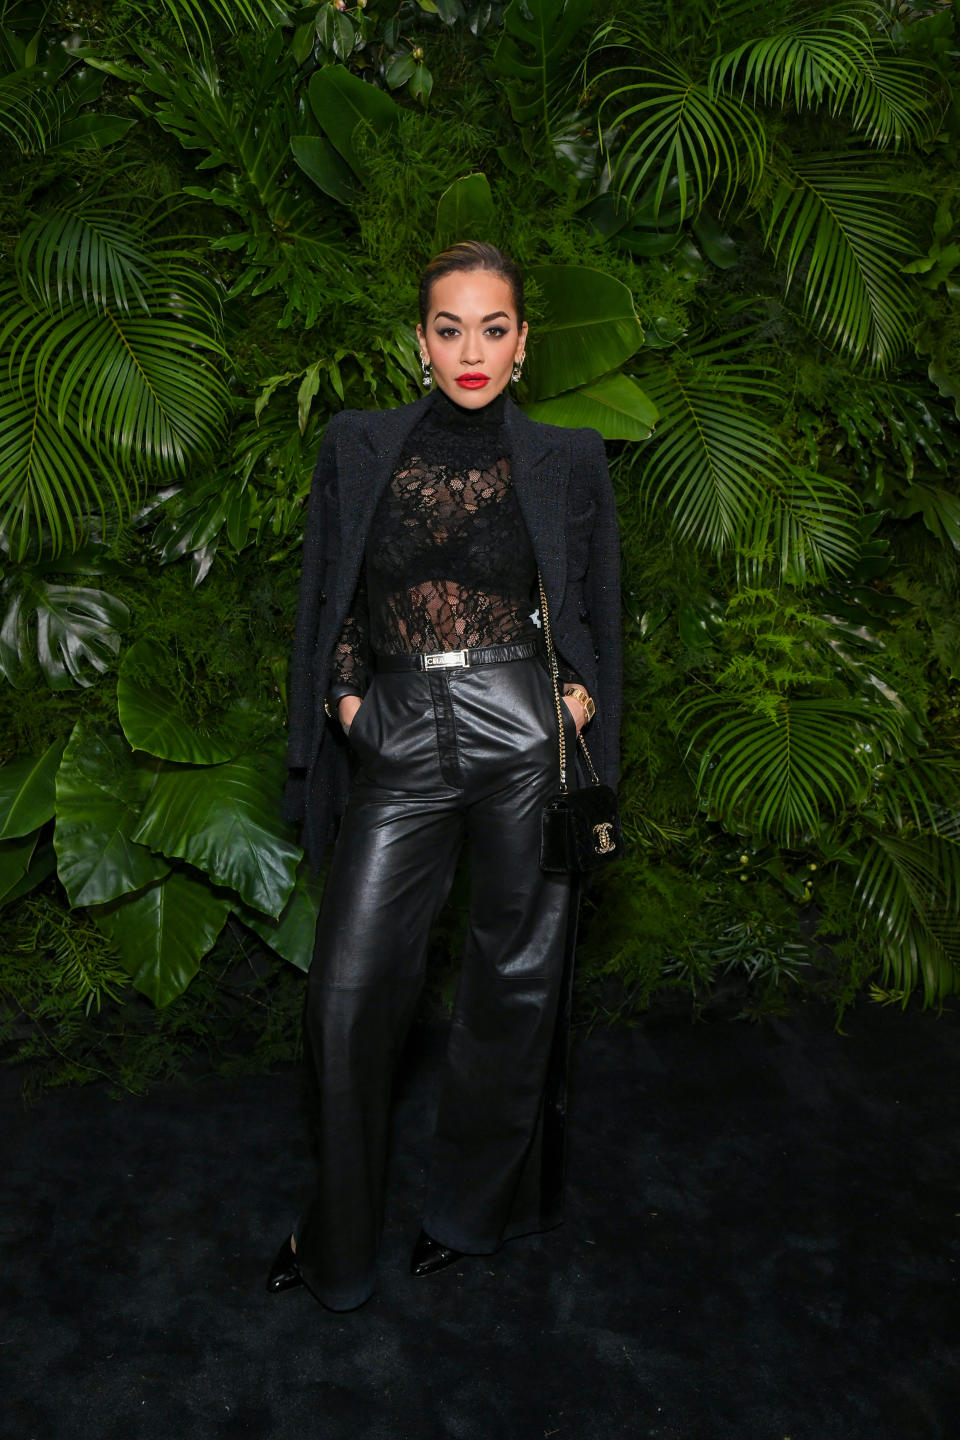 Rita Ora, wearing CHANEL attends the CHANEL and Charles Finch Pre-Oscar Awards Dinner on March 11, 2023 in Beverly Hills, California